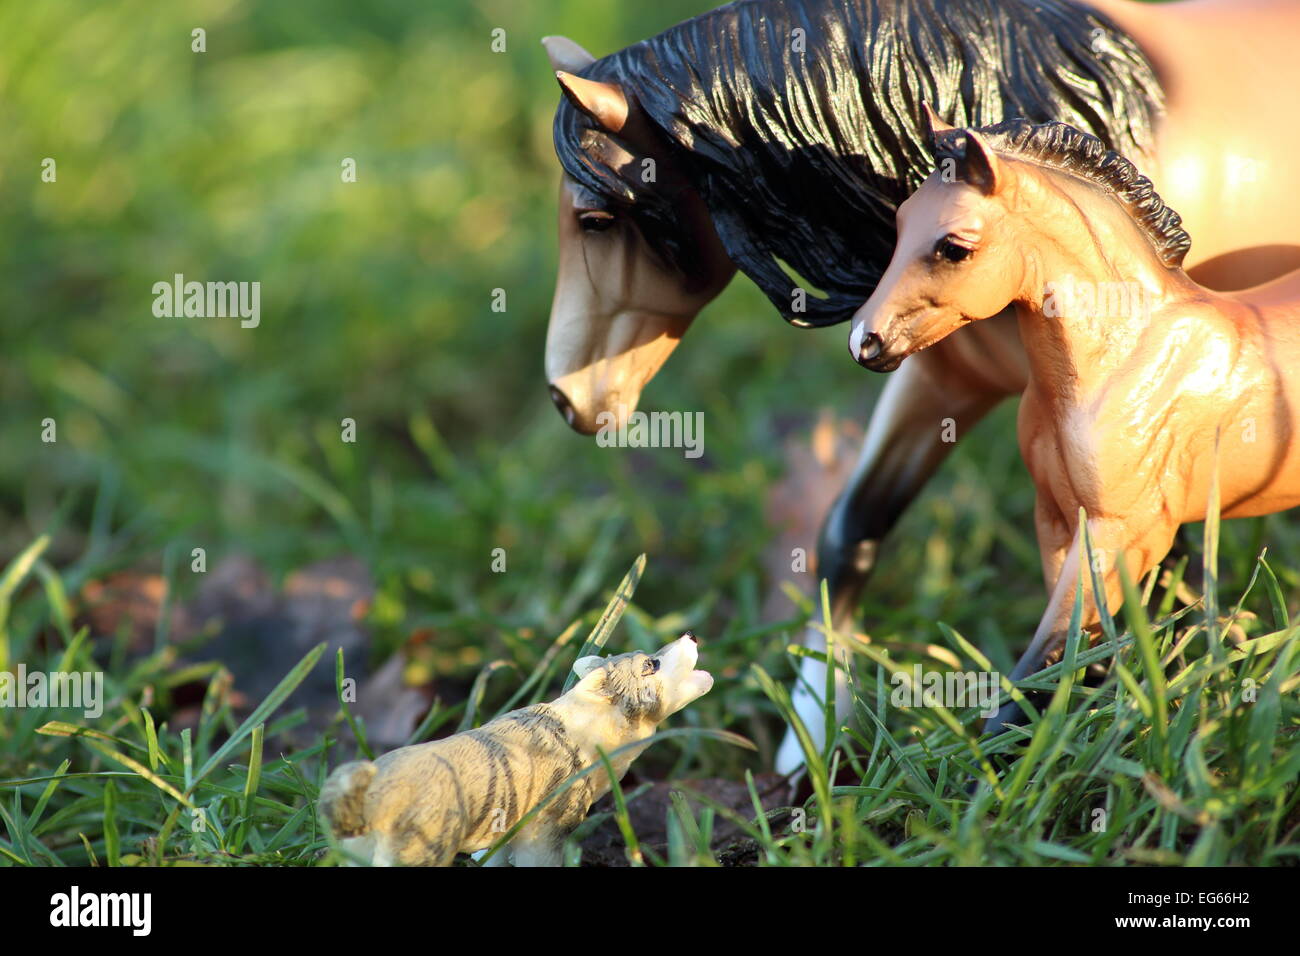 A photograph representing a mother and foal partially in shot as a wolf approaches. Still Life Photography Stock Photo